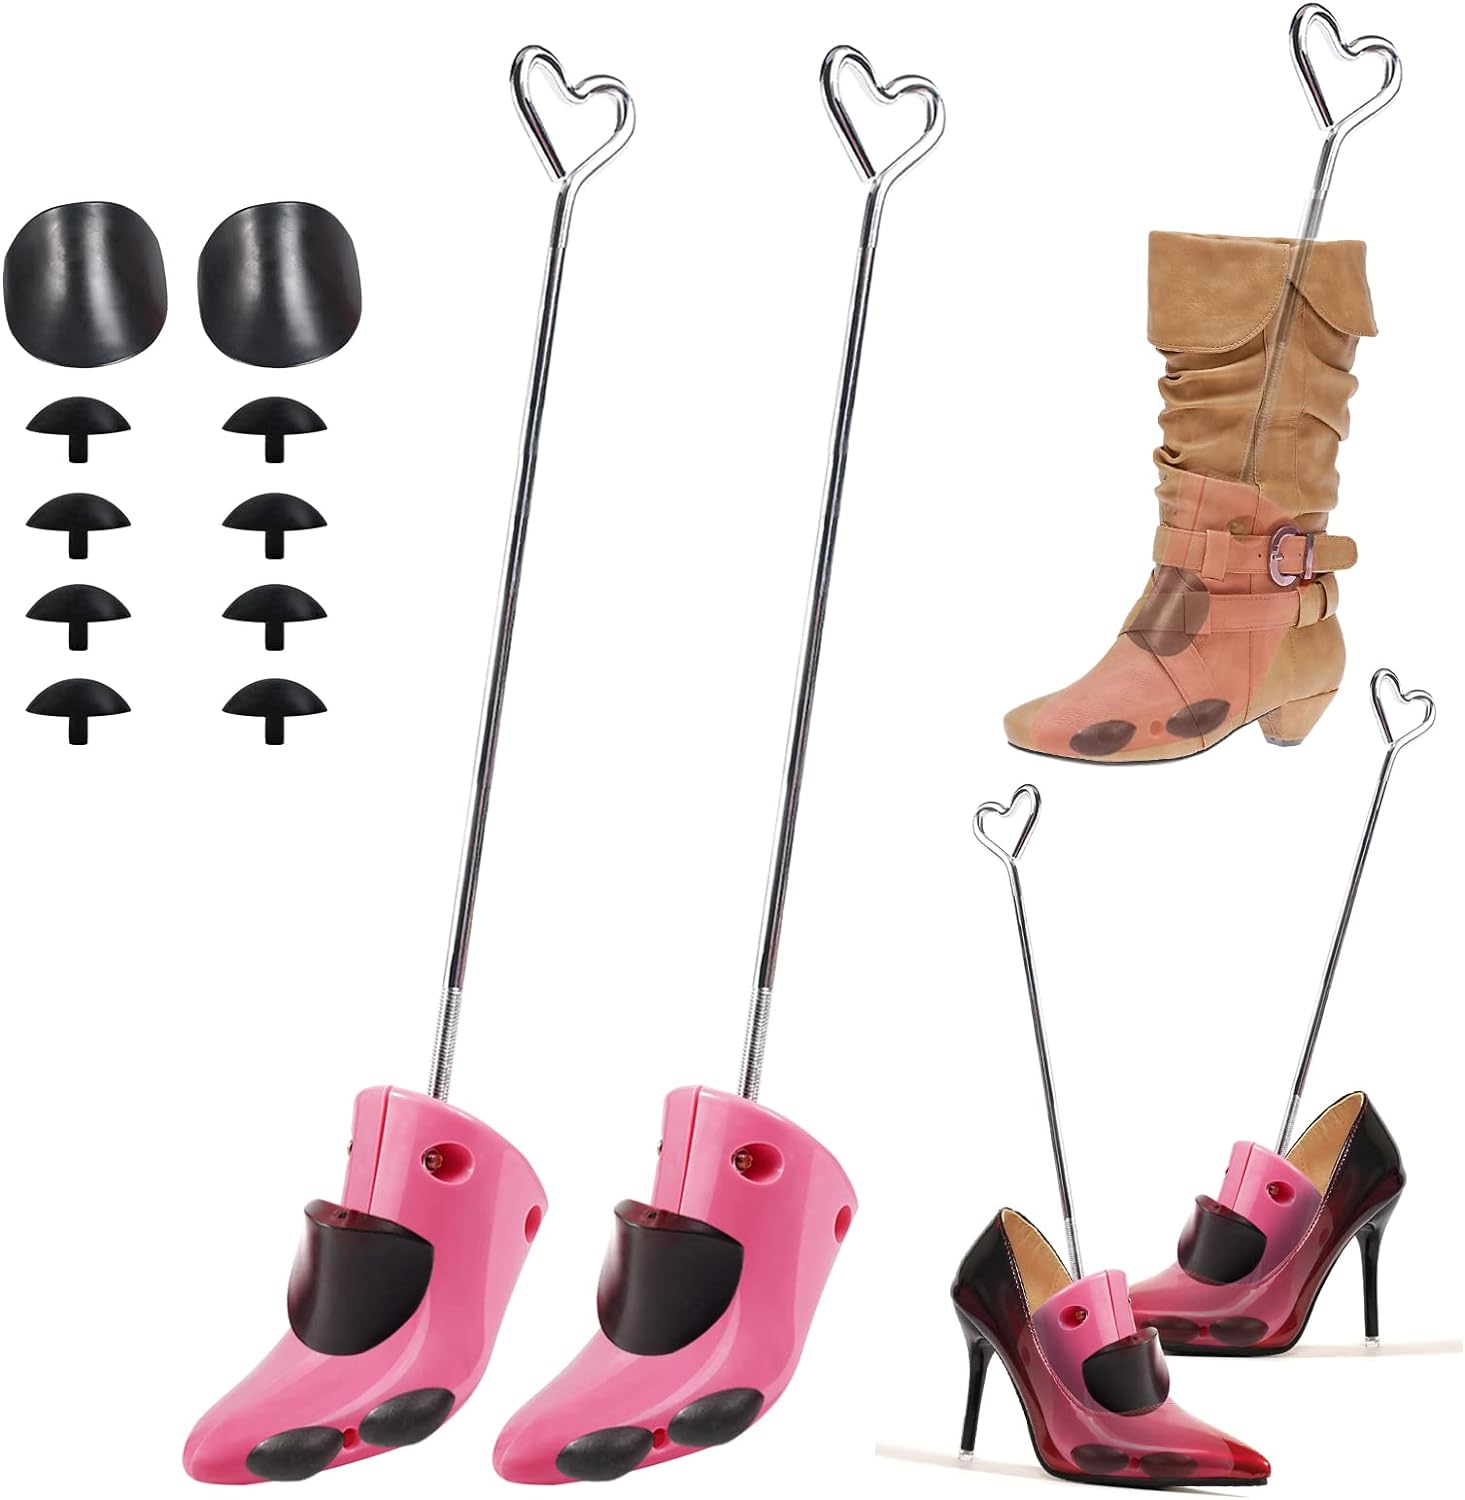 Two-Way Shoe Stretcher Adjustable Length Width Wood Shoe Tree High Heel Boot & Shoe Stretcher Boots Stretchers Expander Shoe Tree for Men and Women